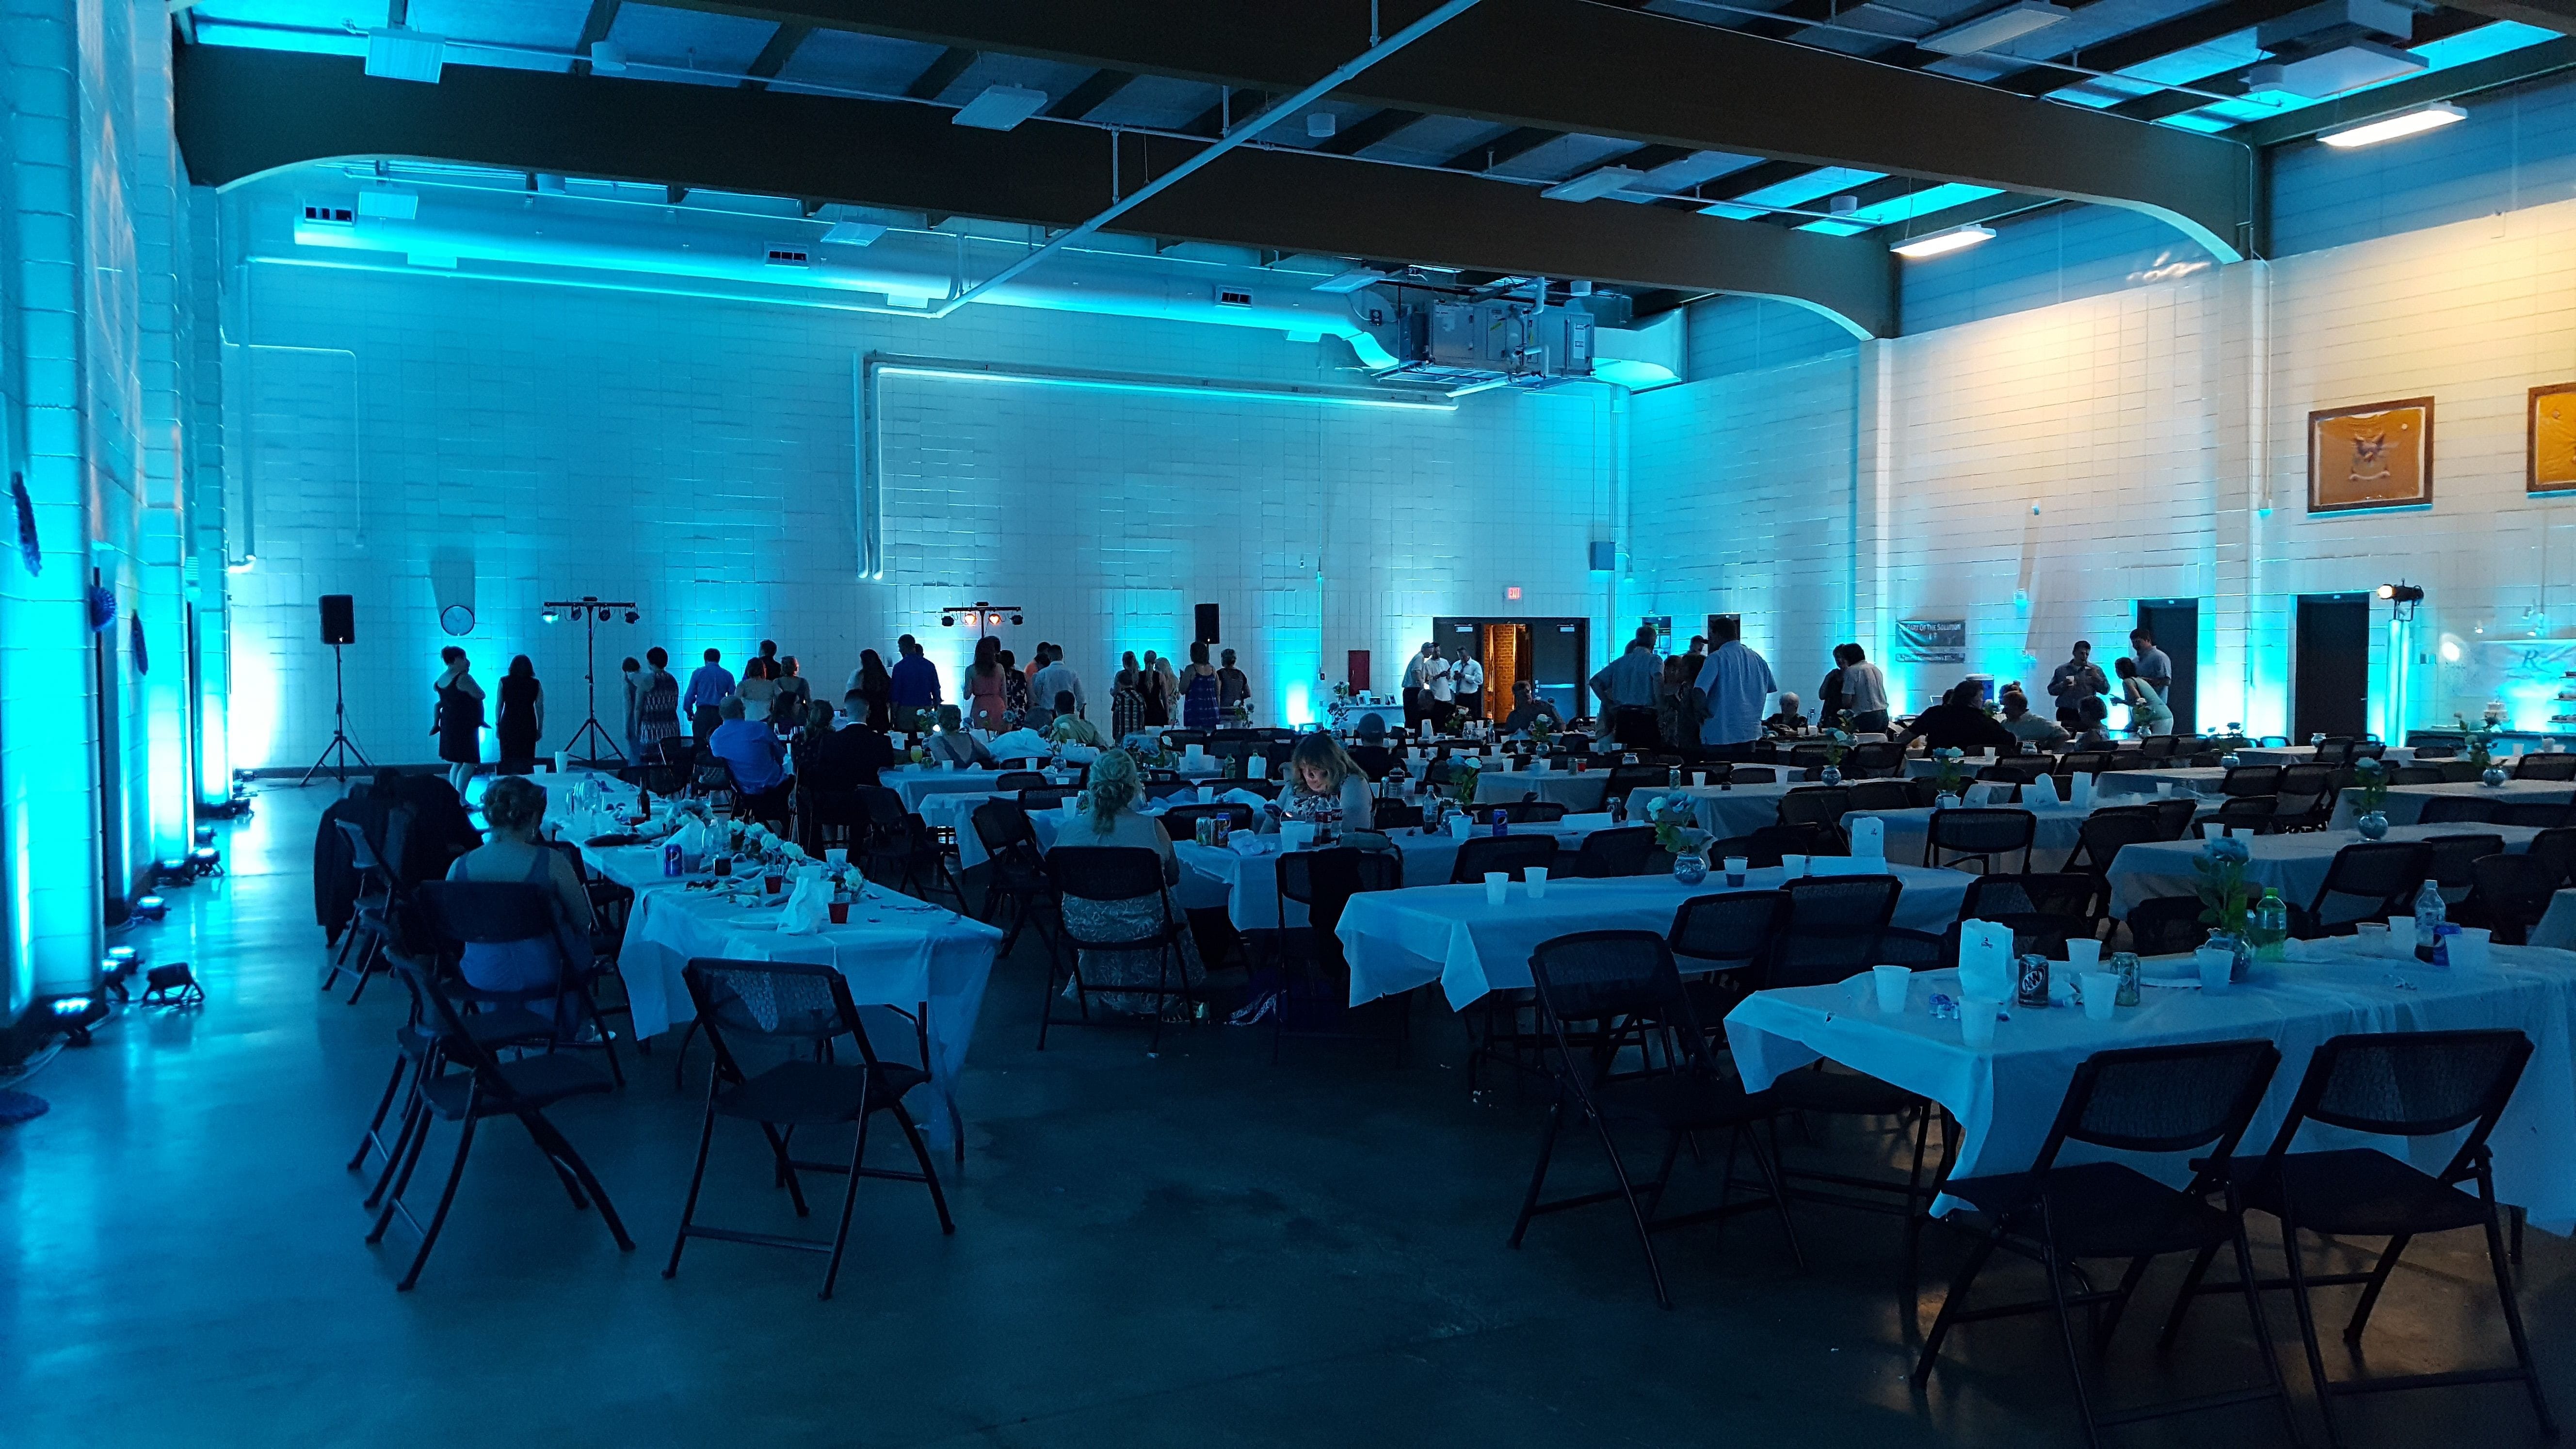 Duluth Armory wedding lighting by Duluth Event Lighting. Up lighting in teal.